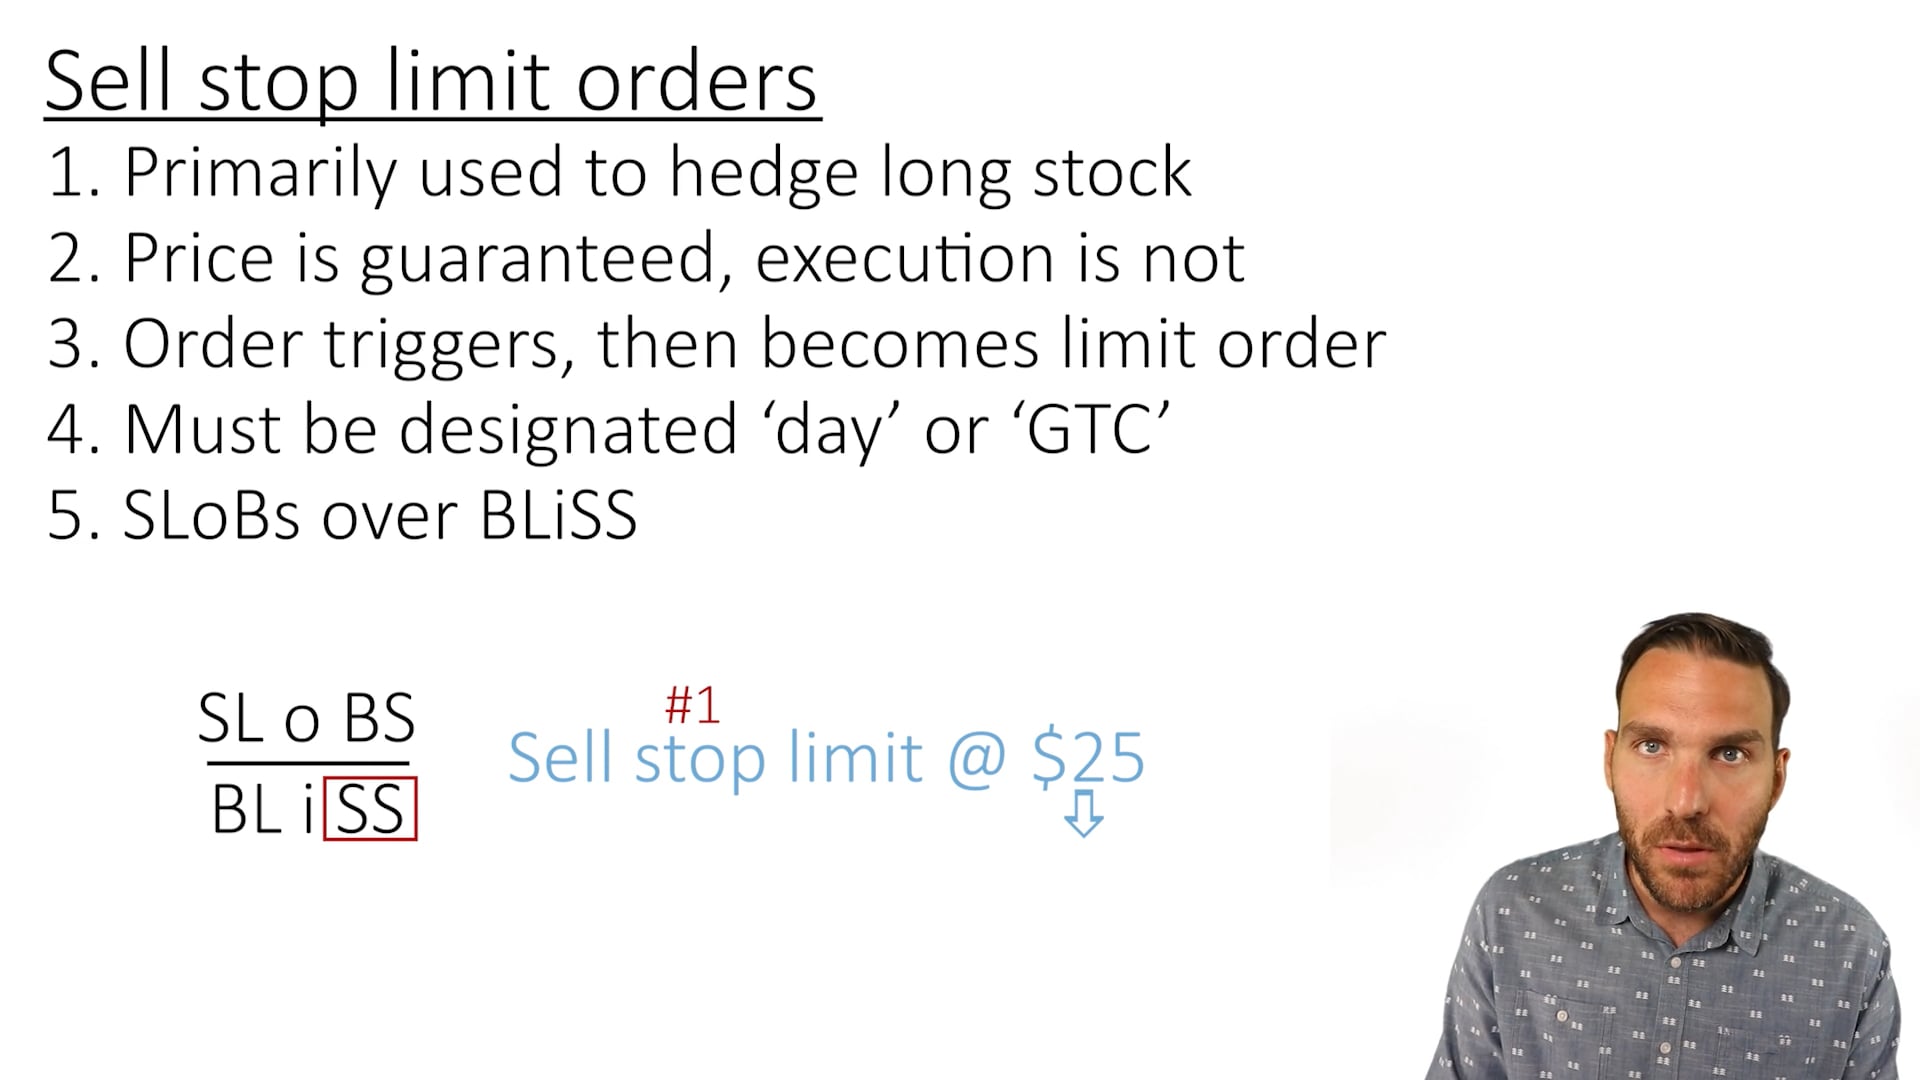 Sell stop limit orders